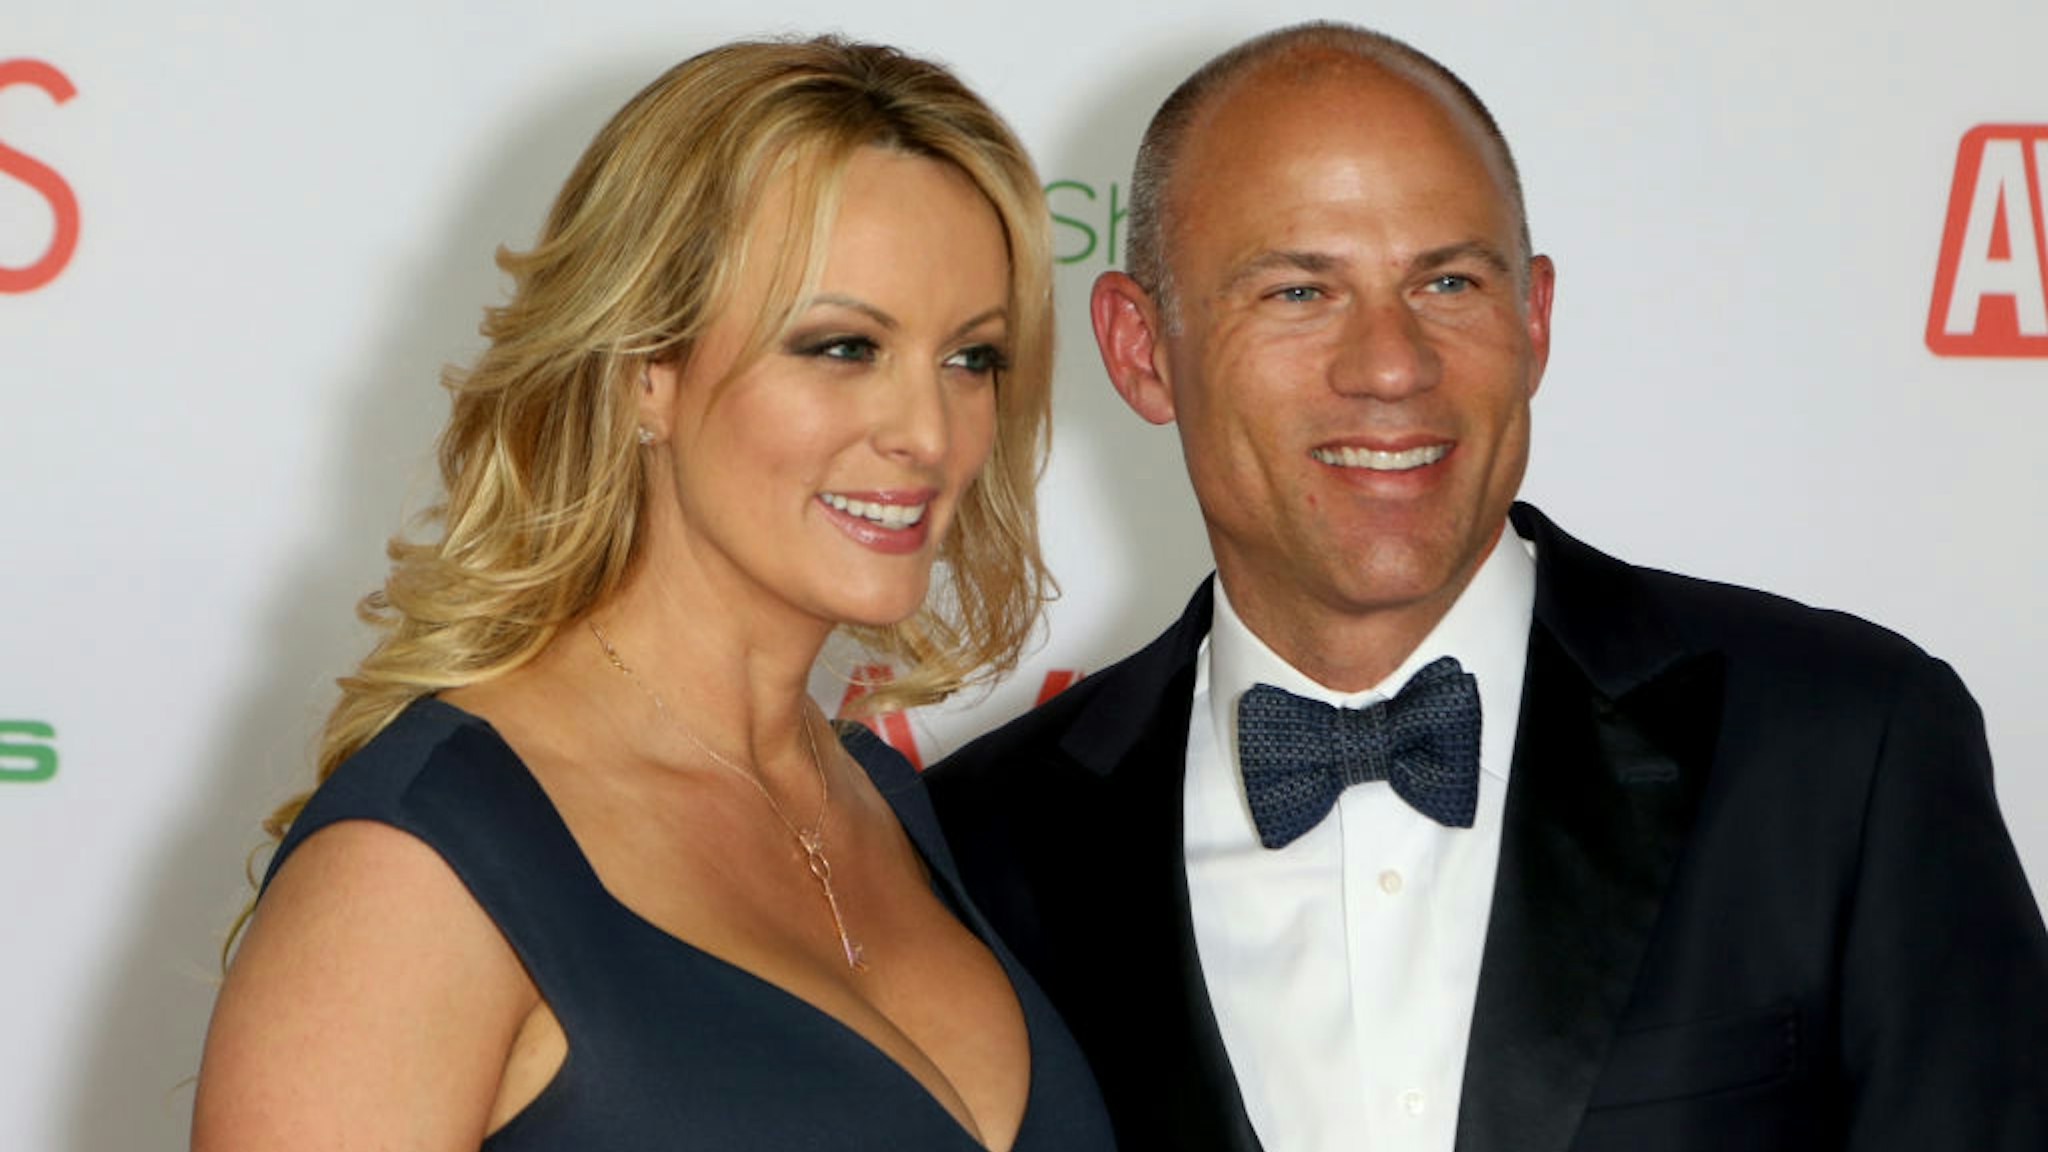 Adult film actress/director Stormy Daniels and attorney Michael Avenatti attend the 2019 Adult Video News Awards at The Joint inside the Hard Rock Hotel & Casino on January 26, 2019 in Las Vegas, Nevada.